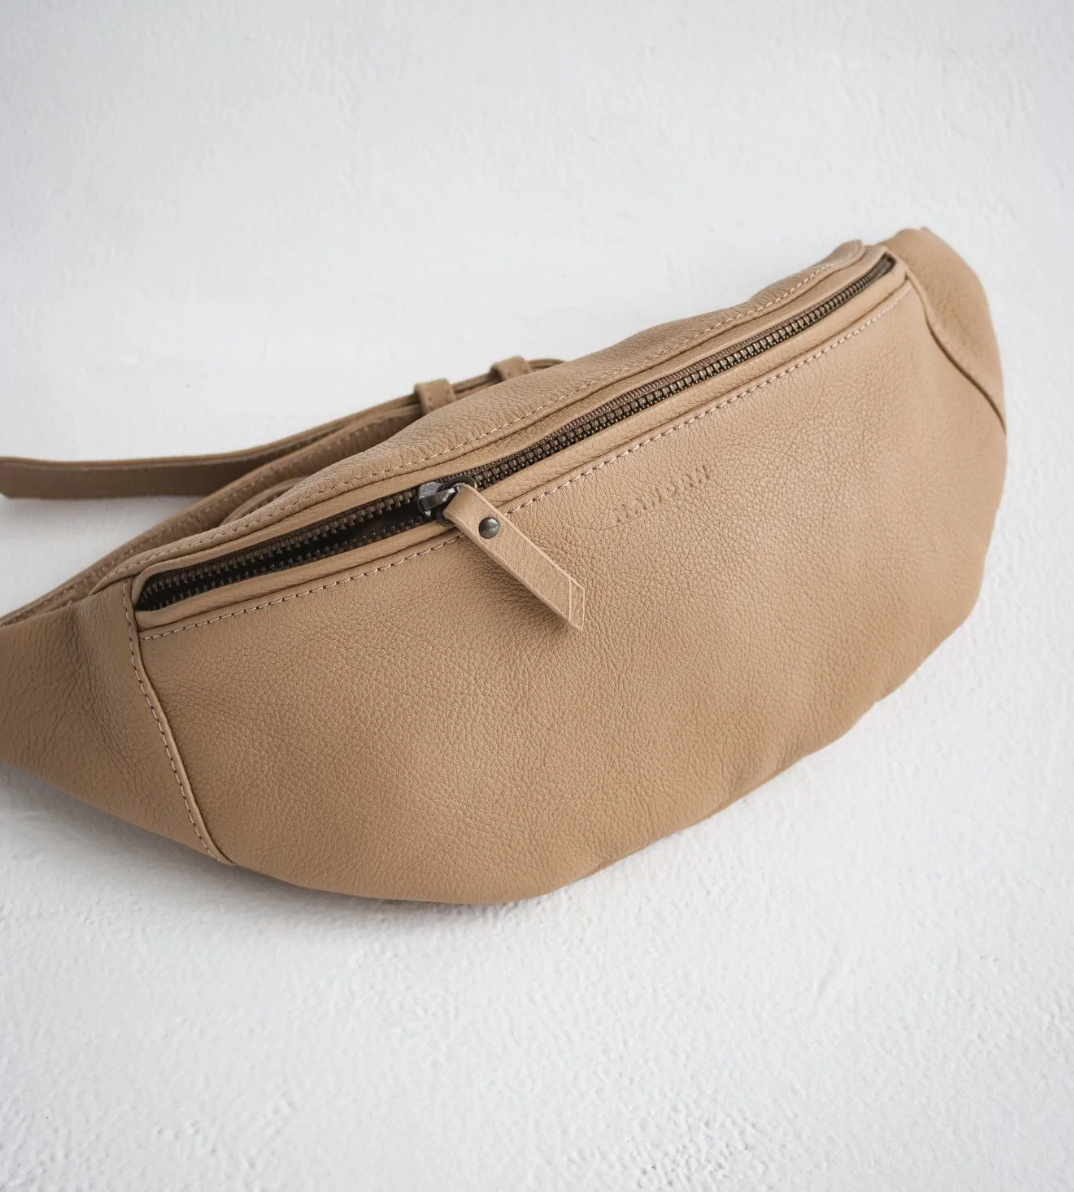 MANDRN  The Atlas- Tan Leather Fanny Pack